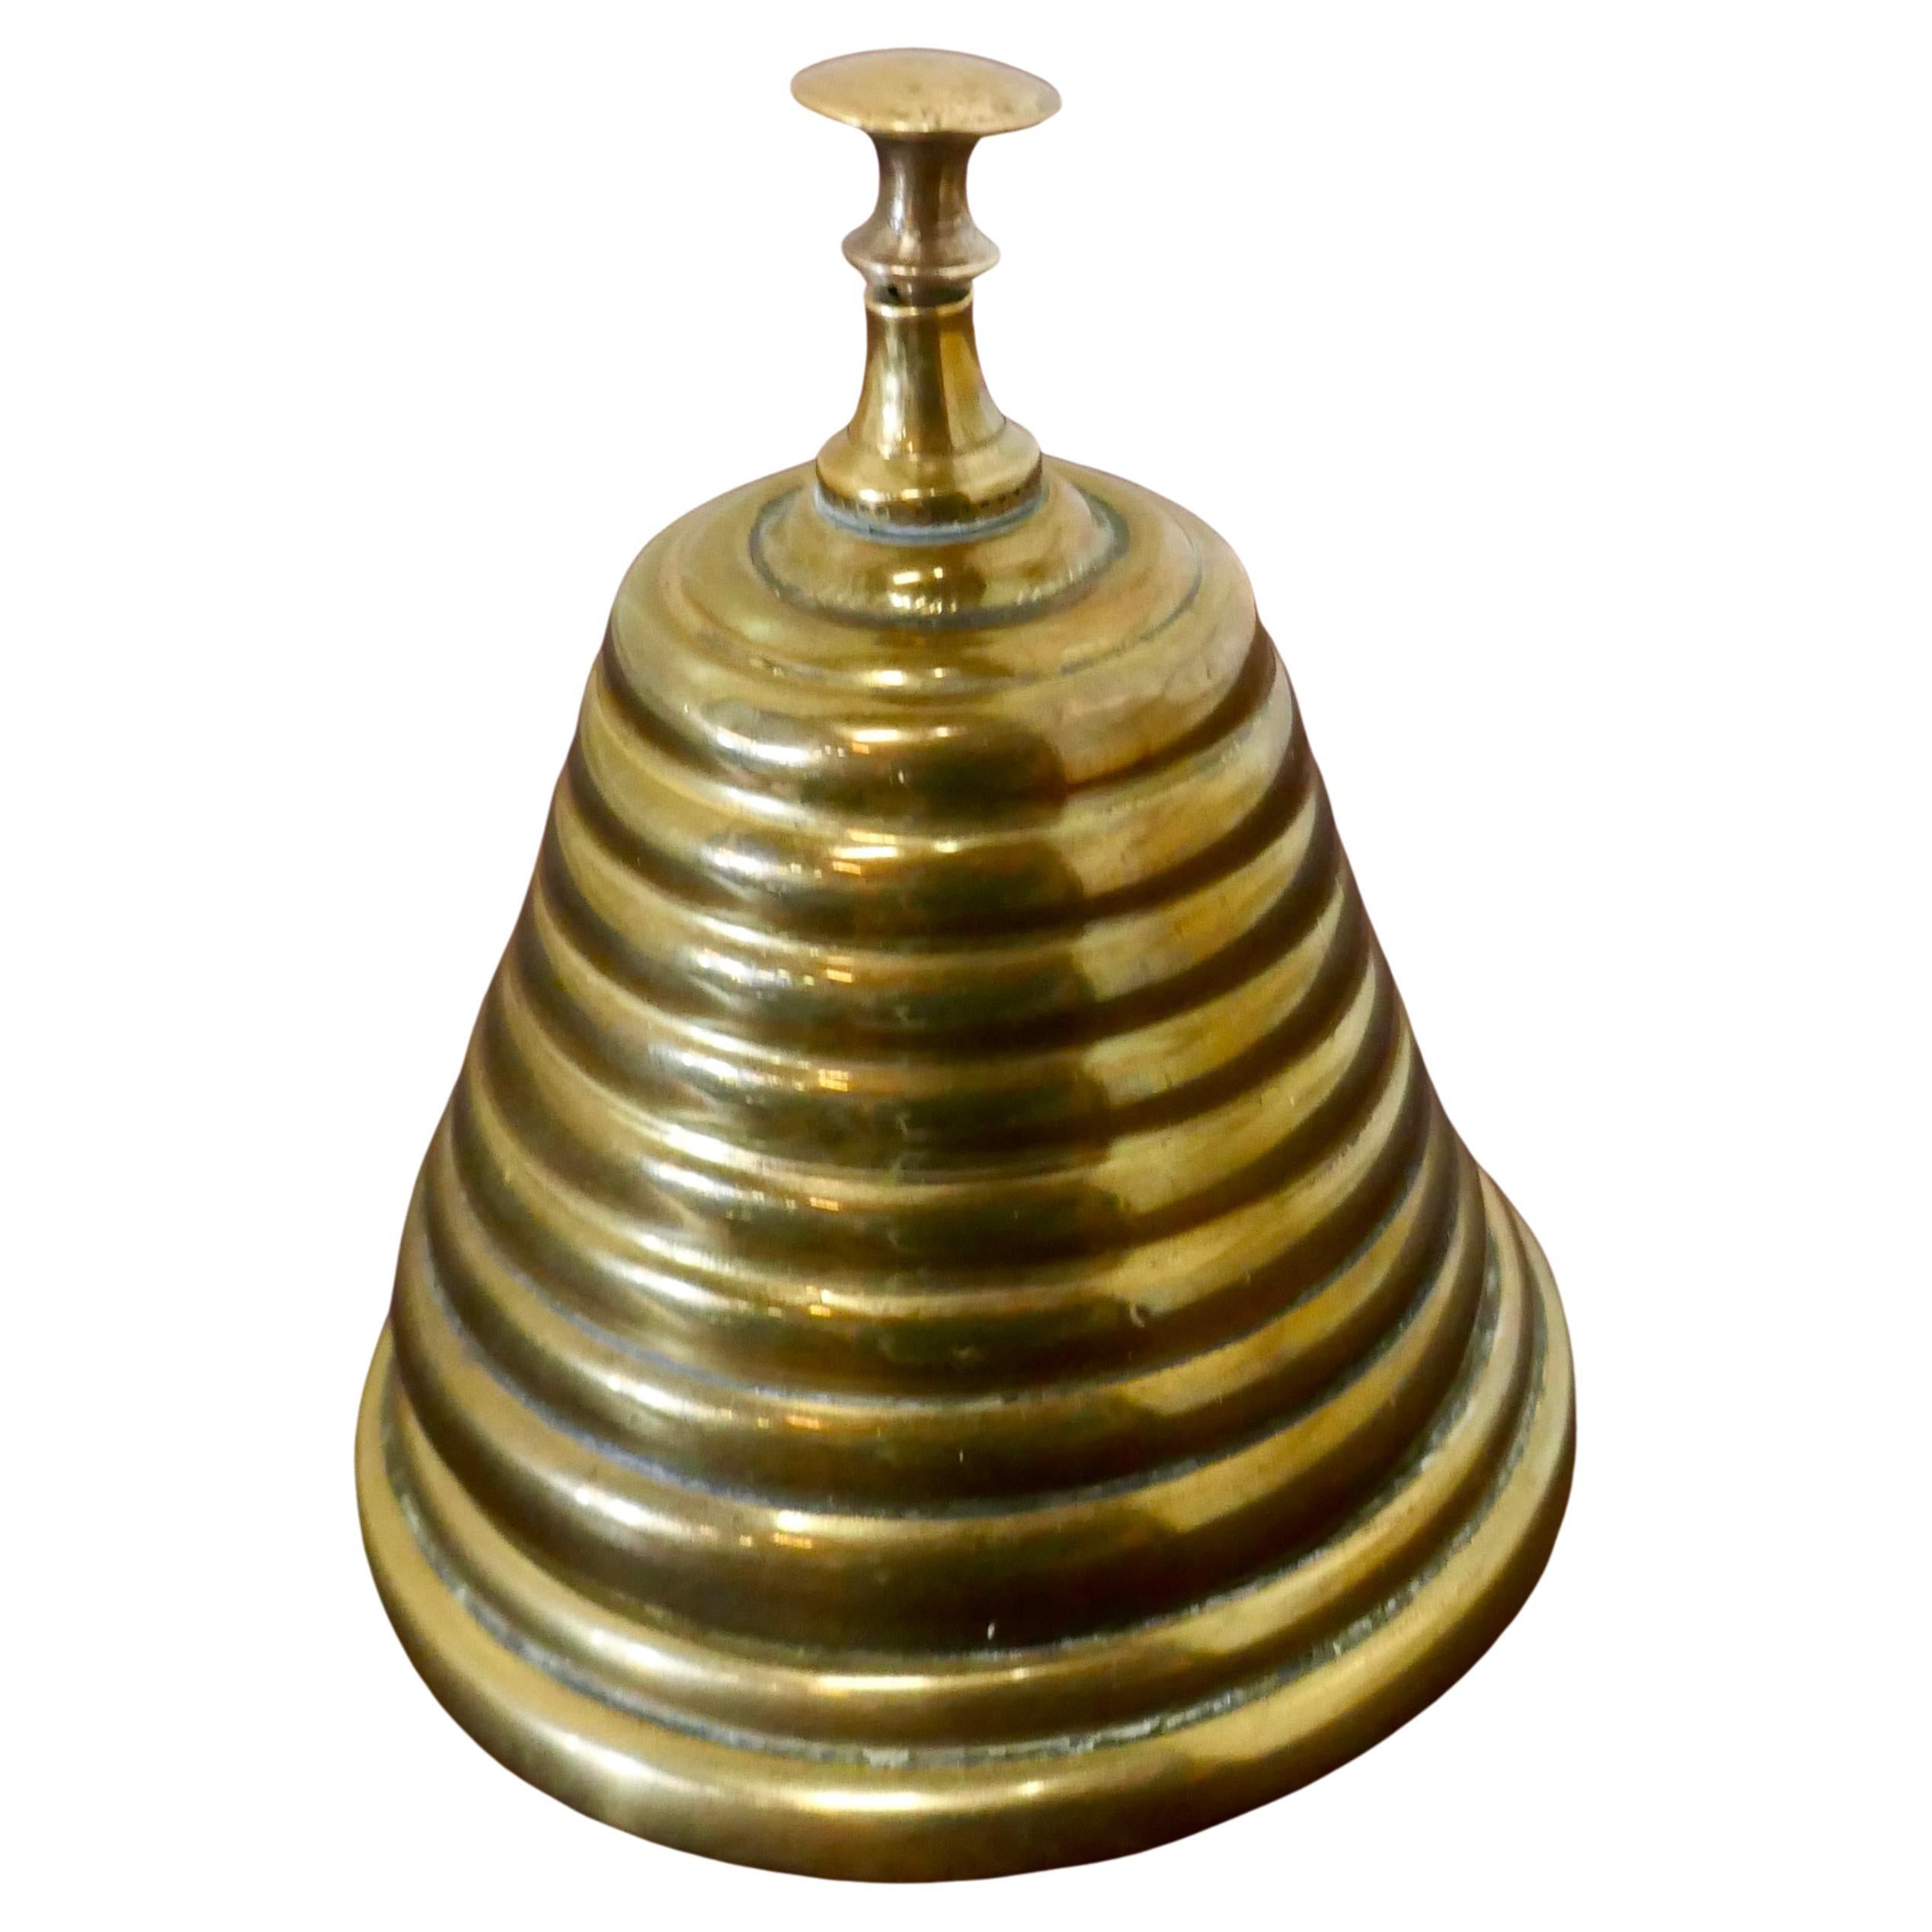 Antique Bell, Shopkeepers, Hotel or Dinner Bell, Works Great - Ruby Lane